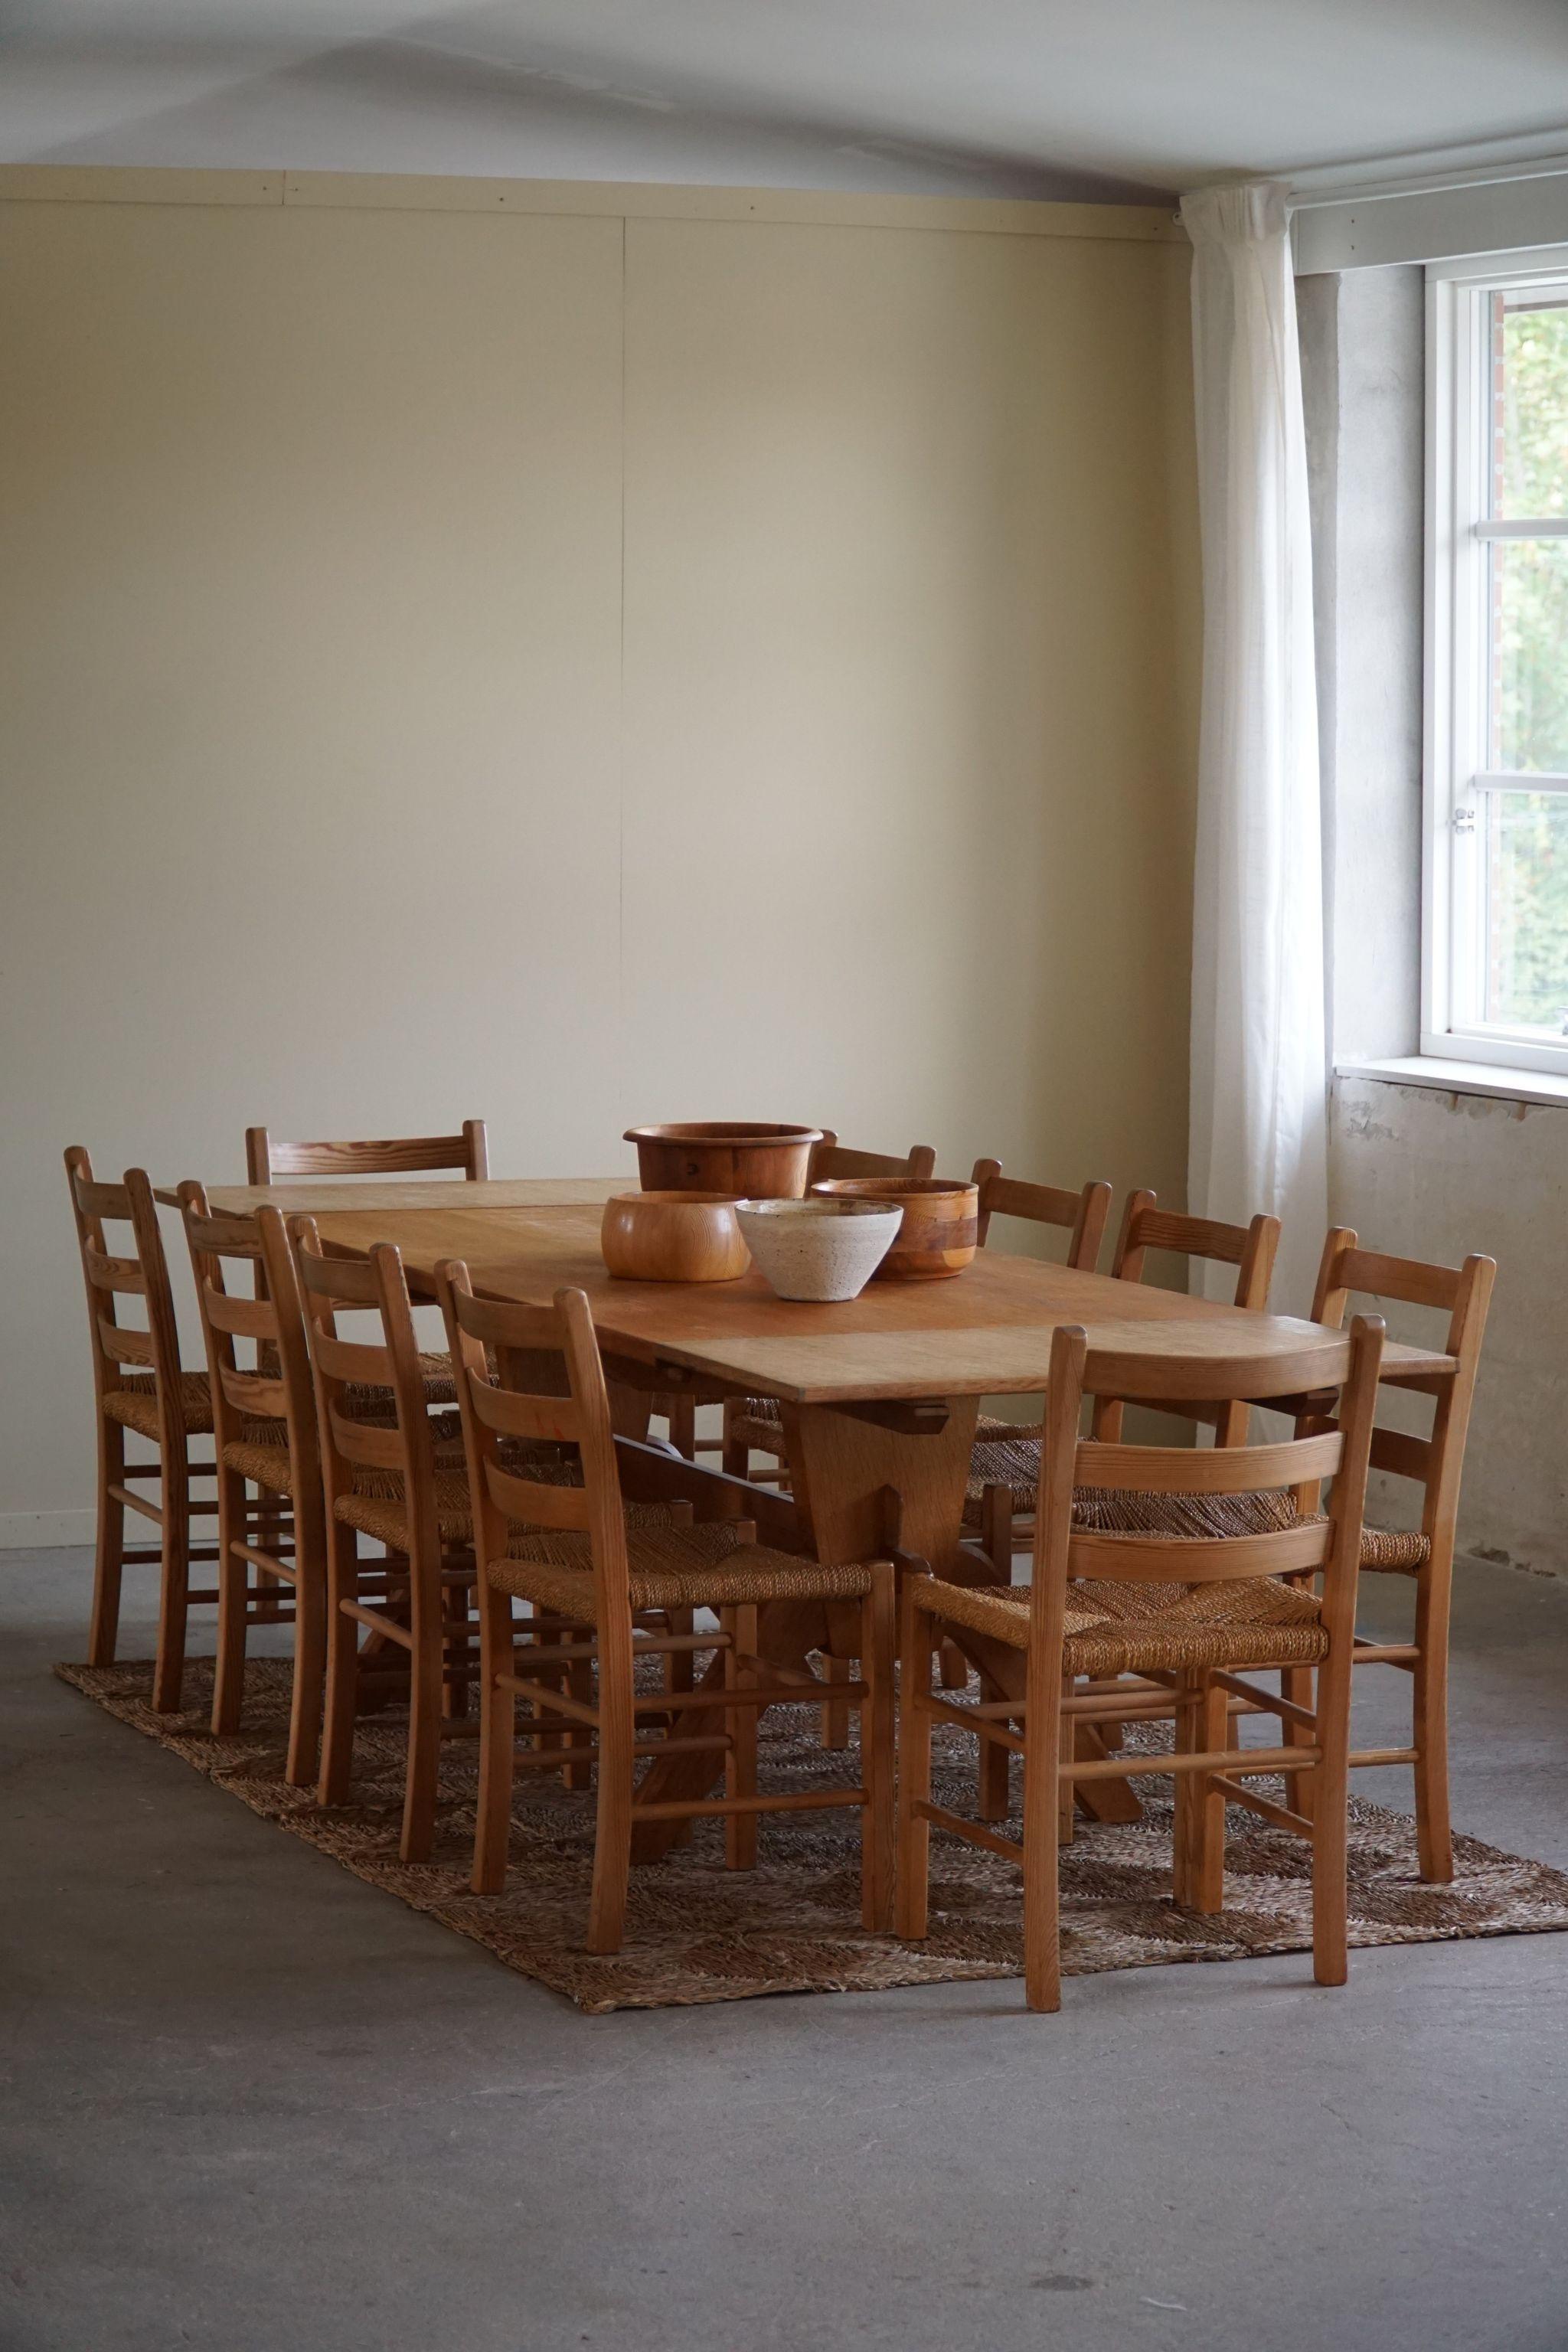 A charming and rustic set of 10 dining chairs in pine and seagrass seats. Made in the 1960s by a Danish cabinetmaker. 
A fine mid century brutalist set that pairs well with many types of interior styles. A Modern, Bohemian, Scandinavian or Classic